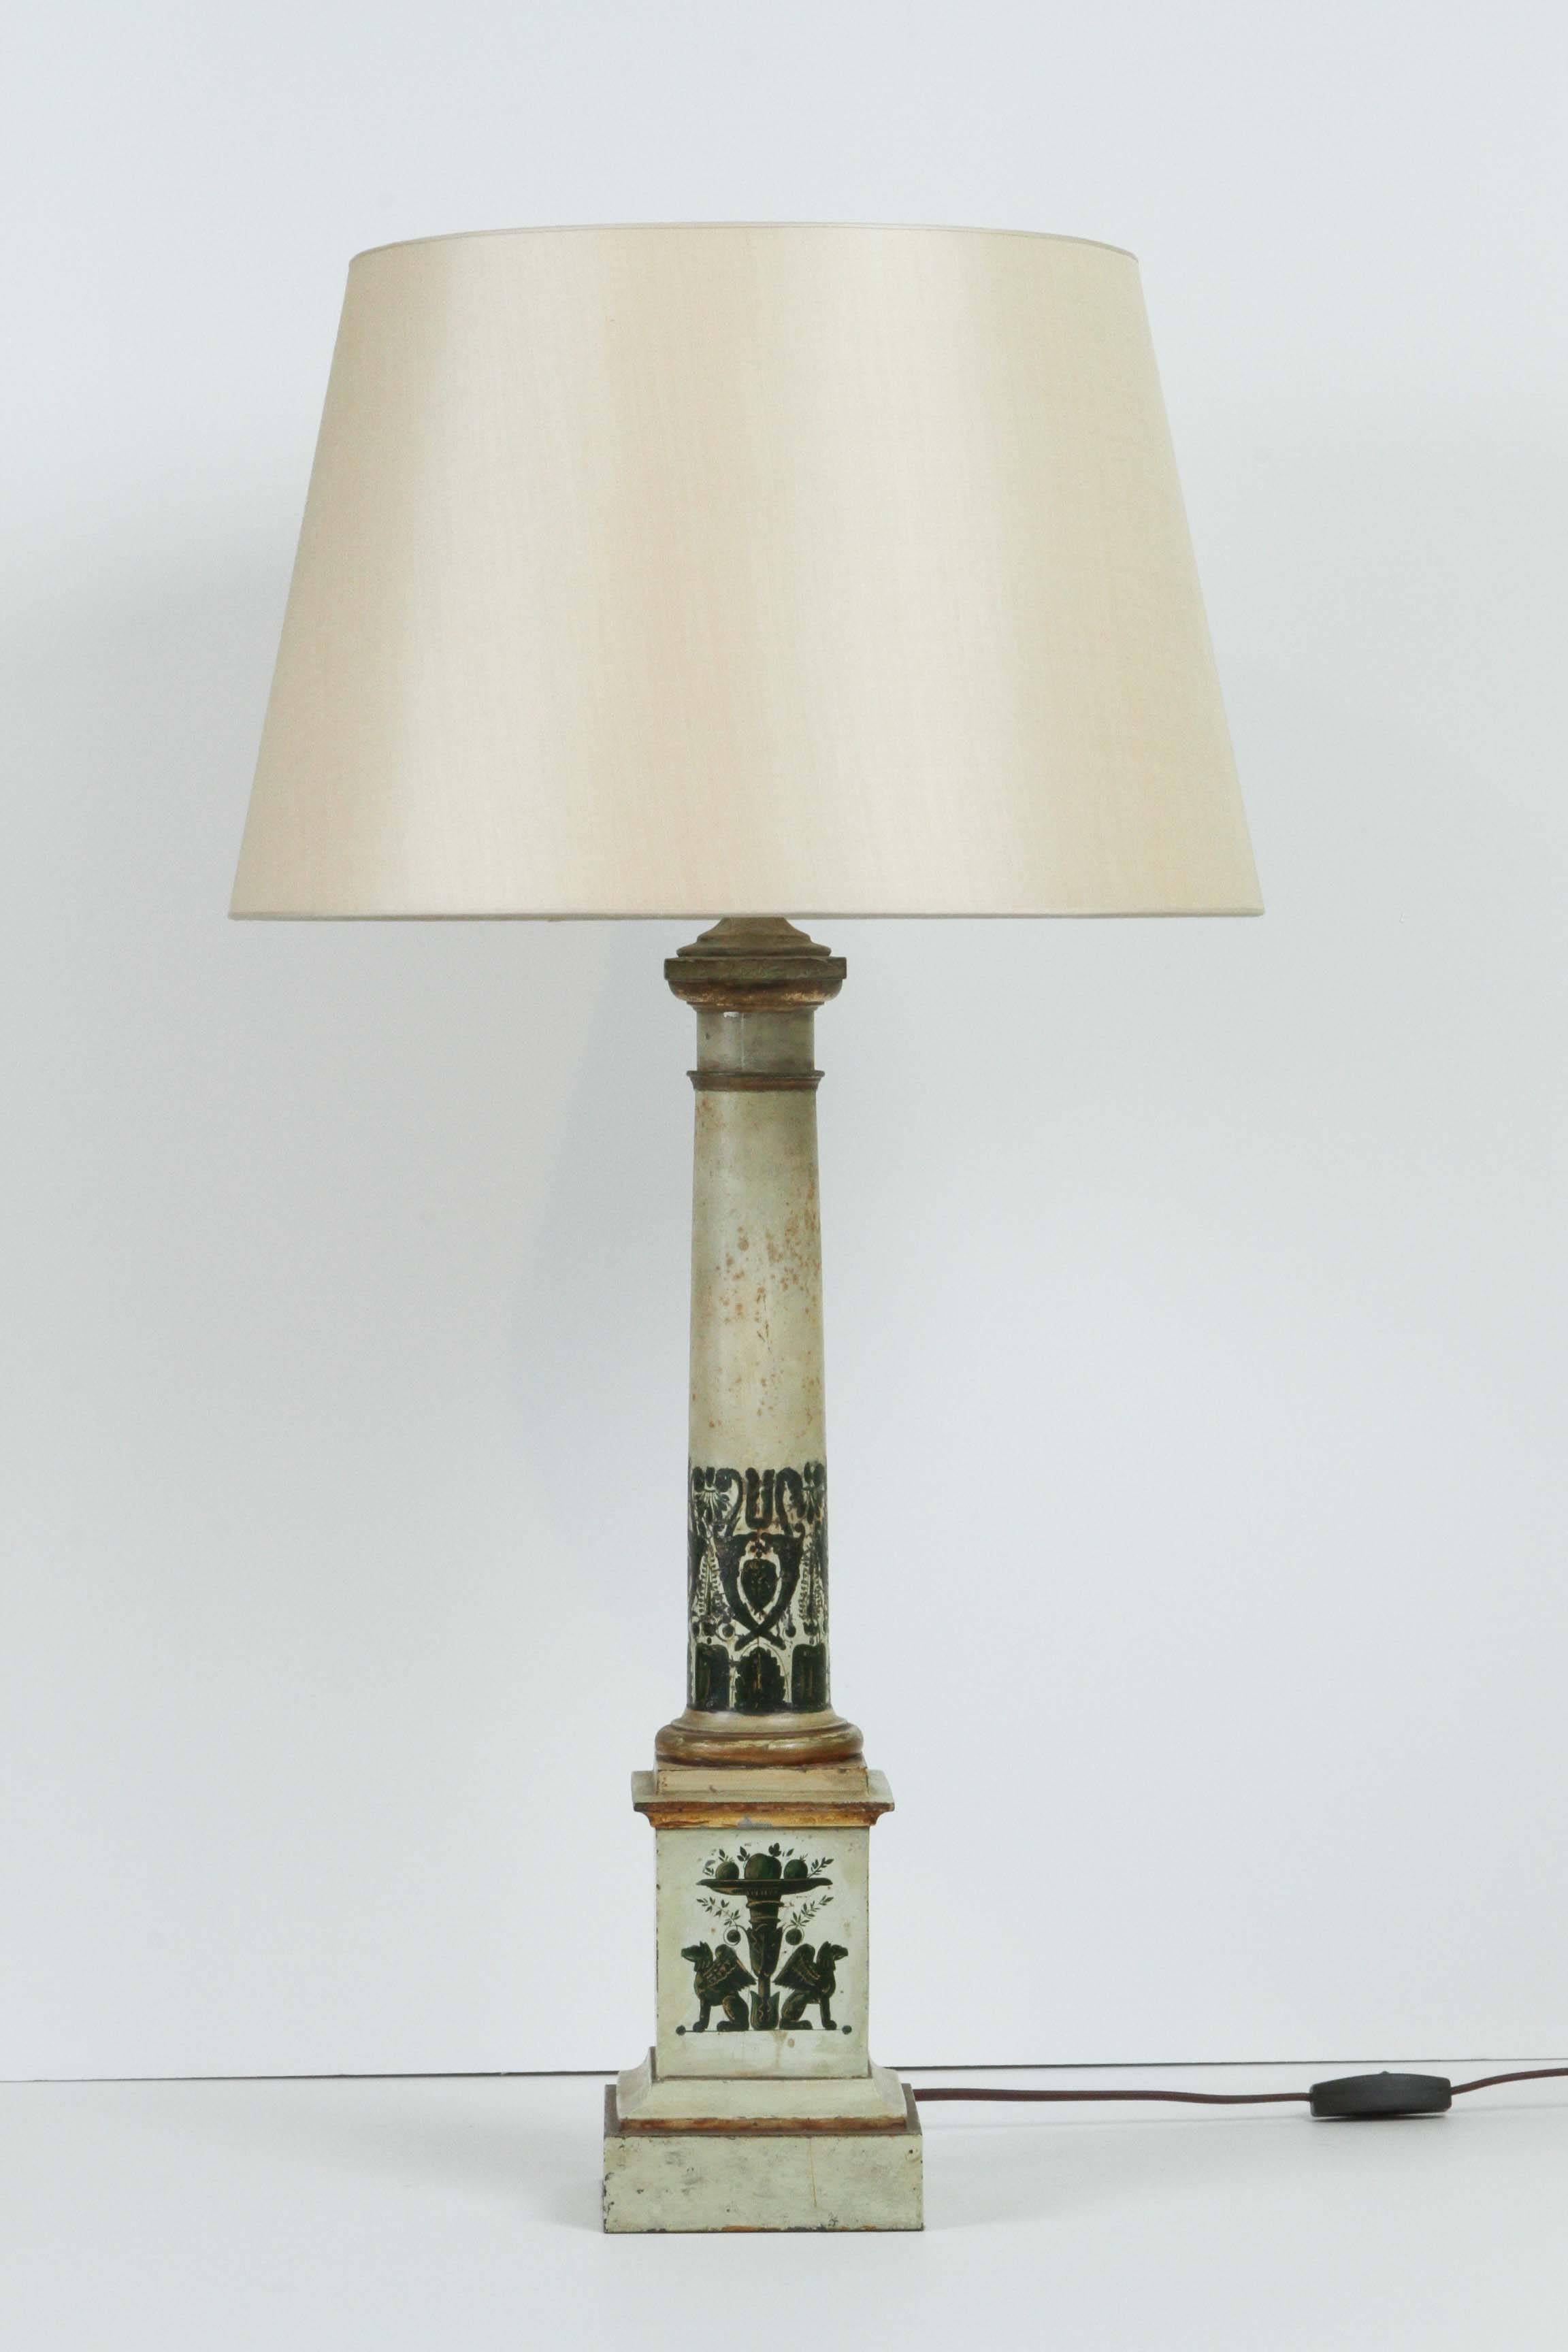 A pair of French painted tole lamps in cream and green, early 20th century, with custom silk pongee shades.